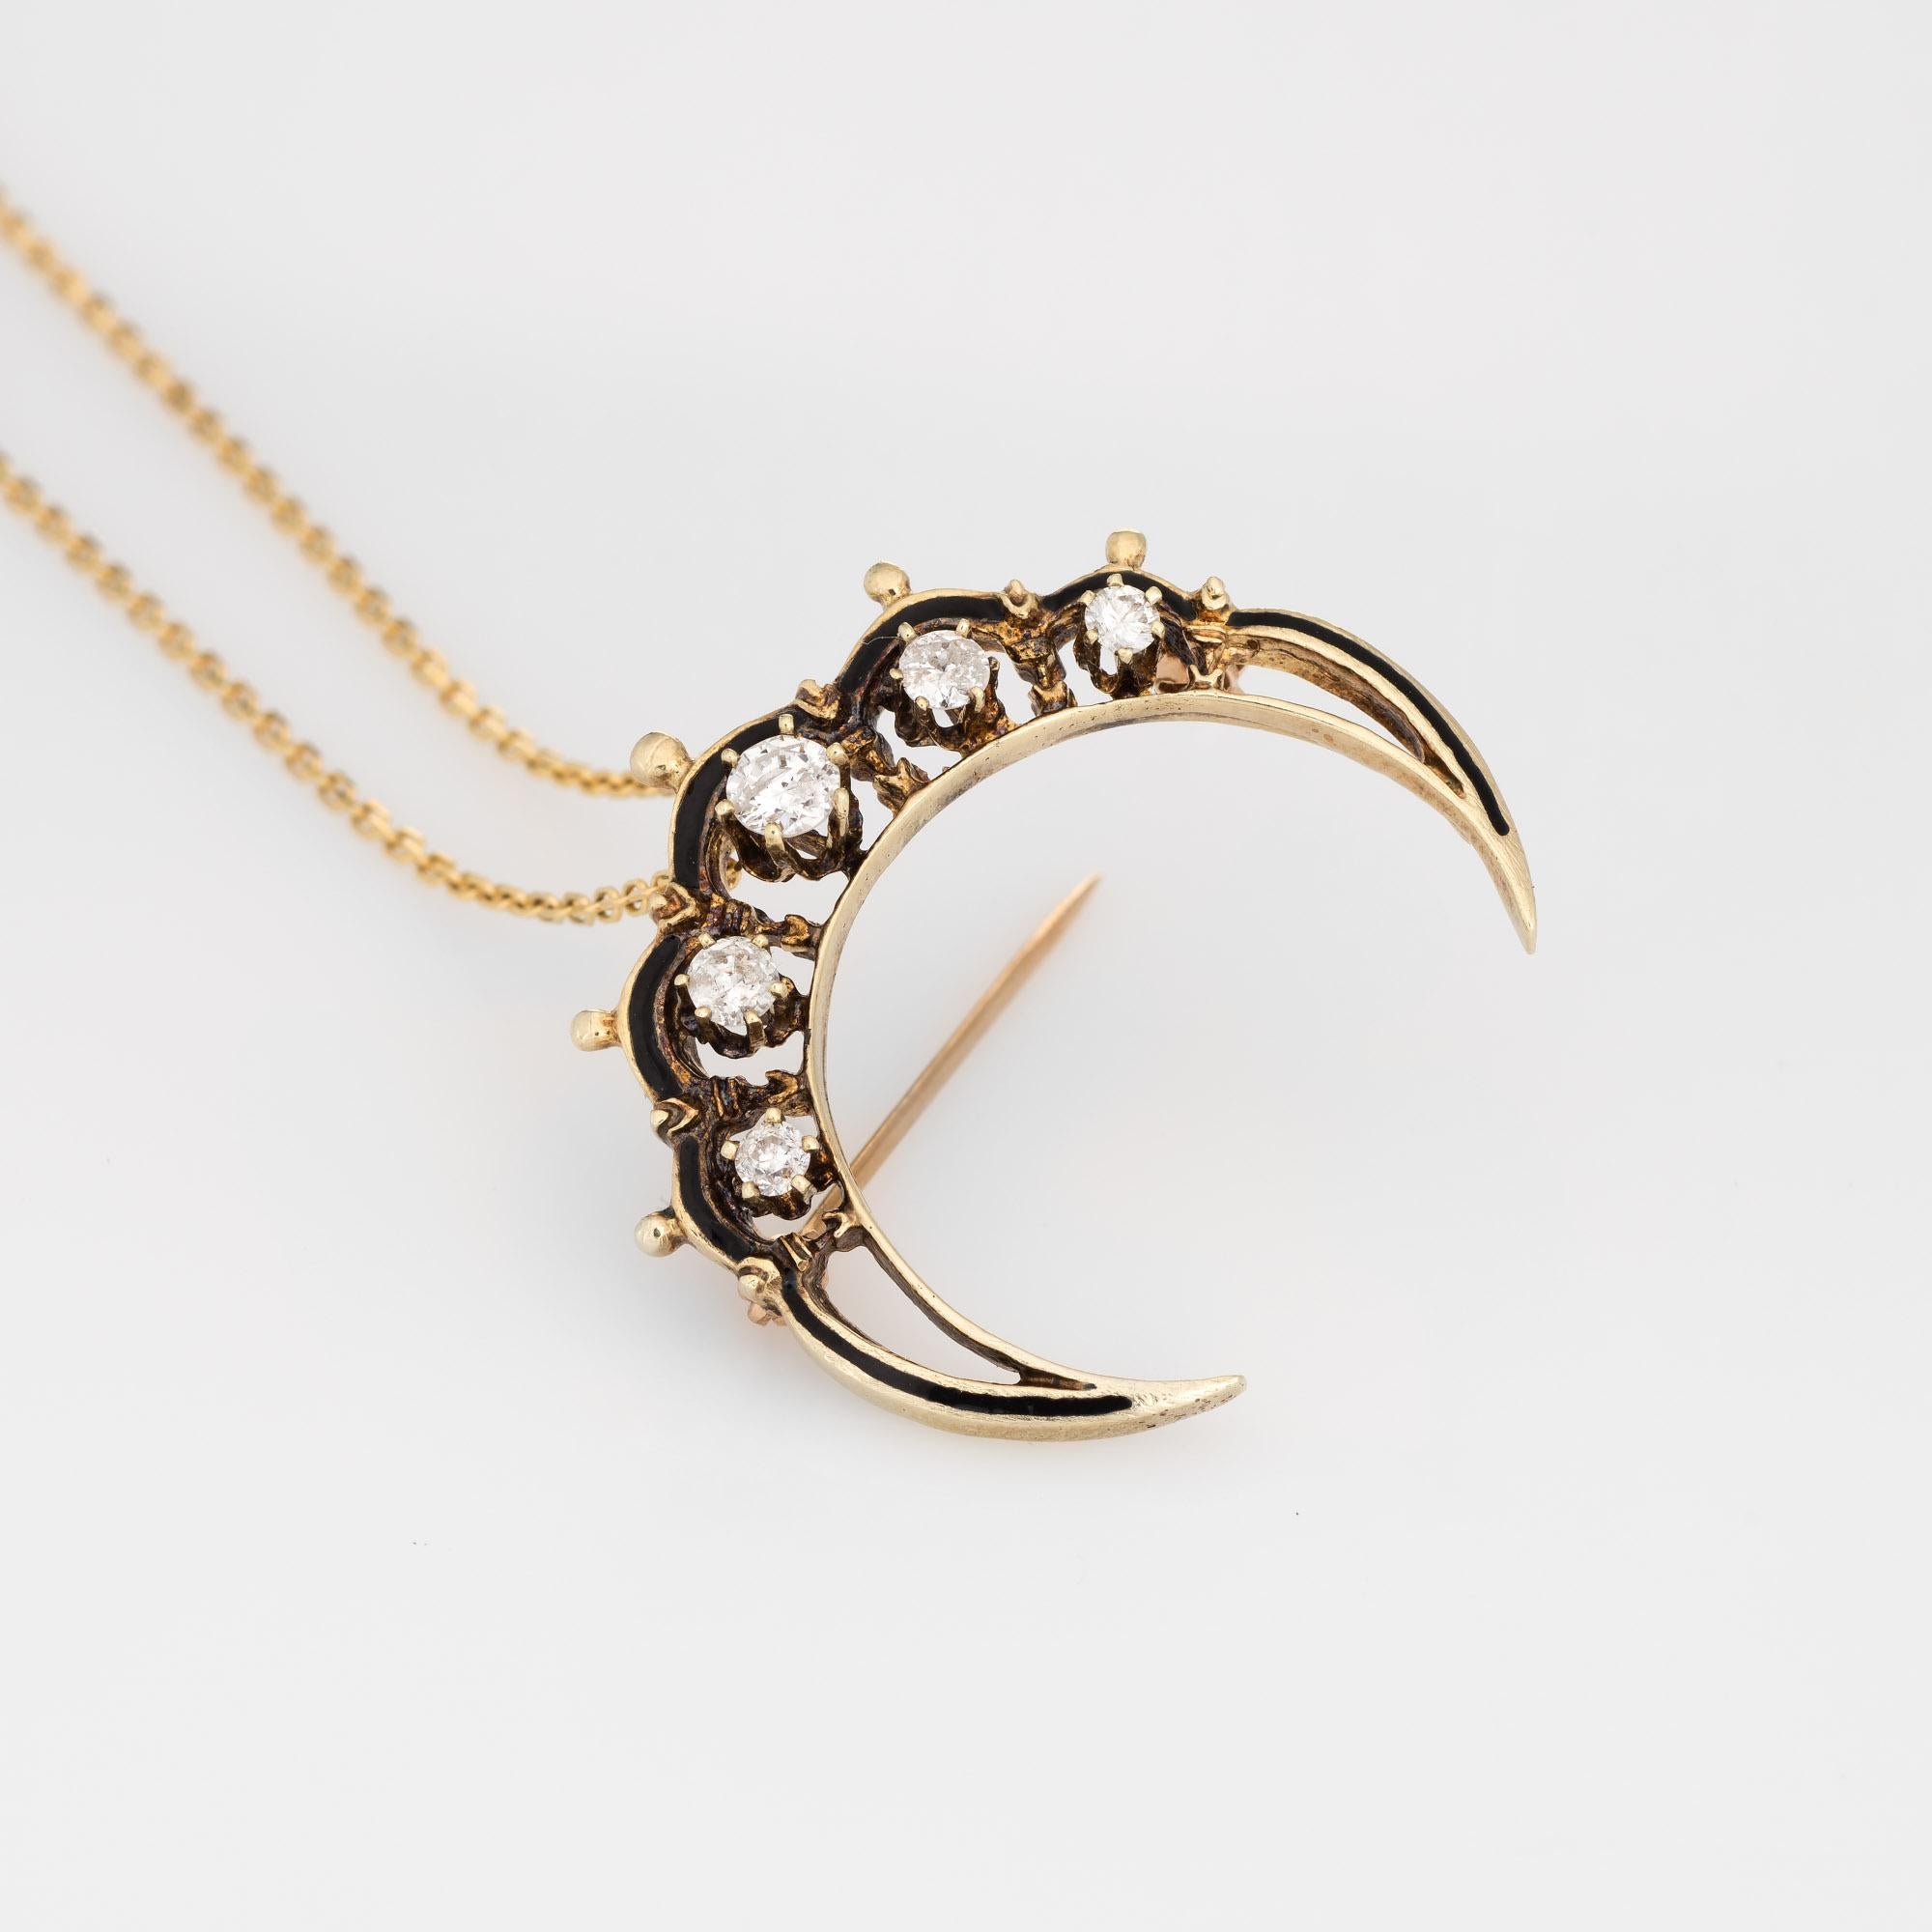 Modern Crescent Moon Diamond Pendant Vintage 14k Yellow Gold Necklace Celestial Jewelry For Sale